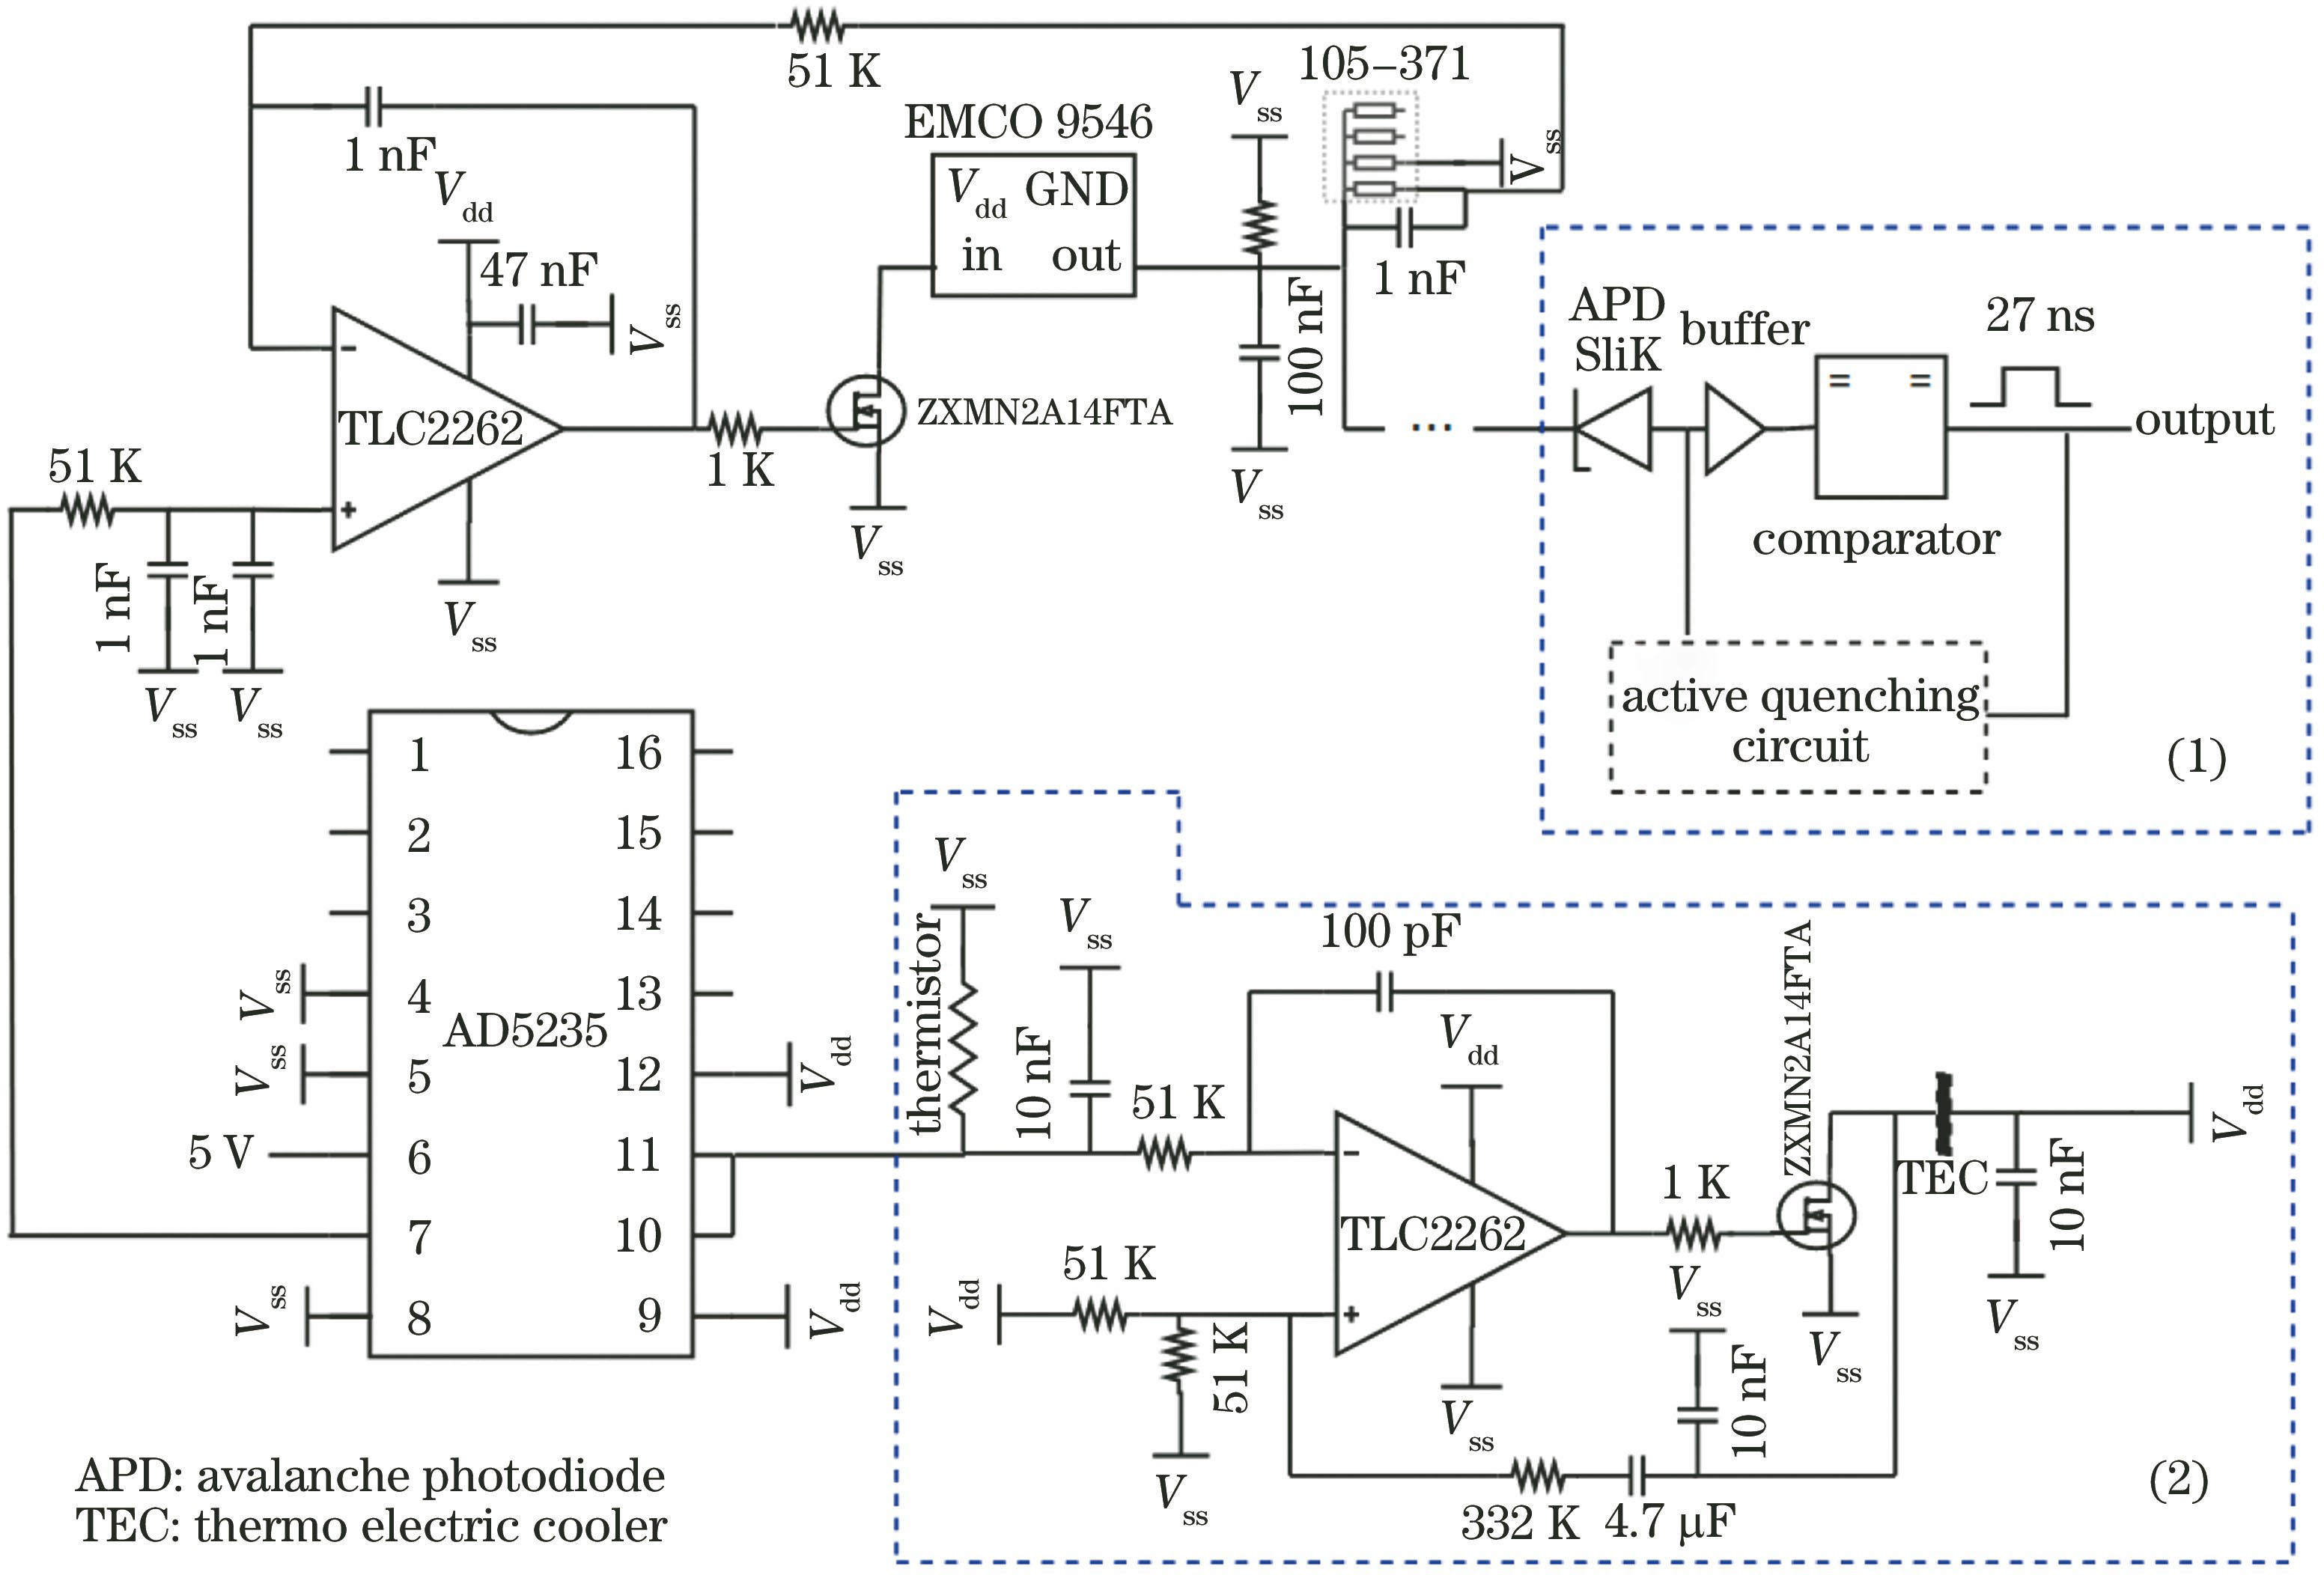 Simplified engineering circuit diagram of avalanche diode peripheral circuit module